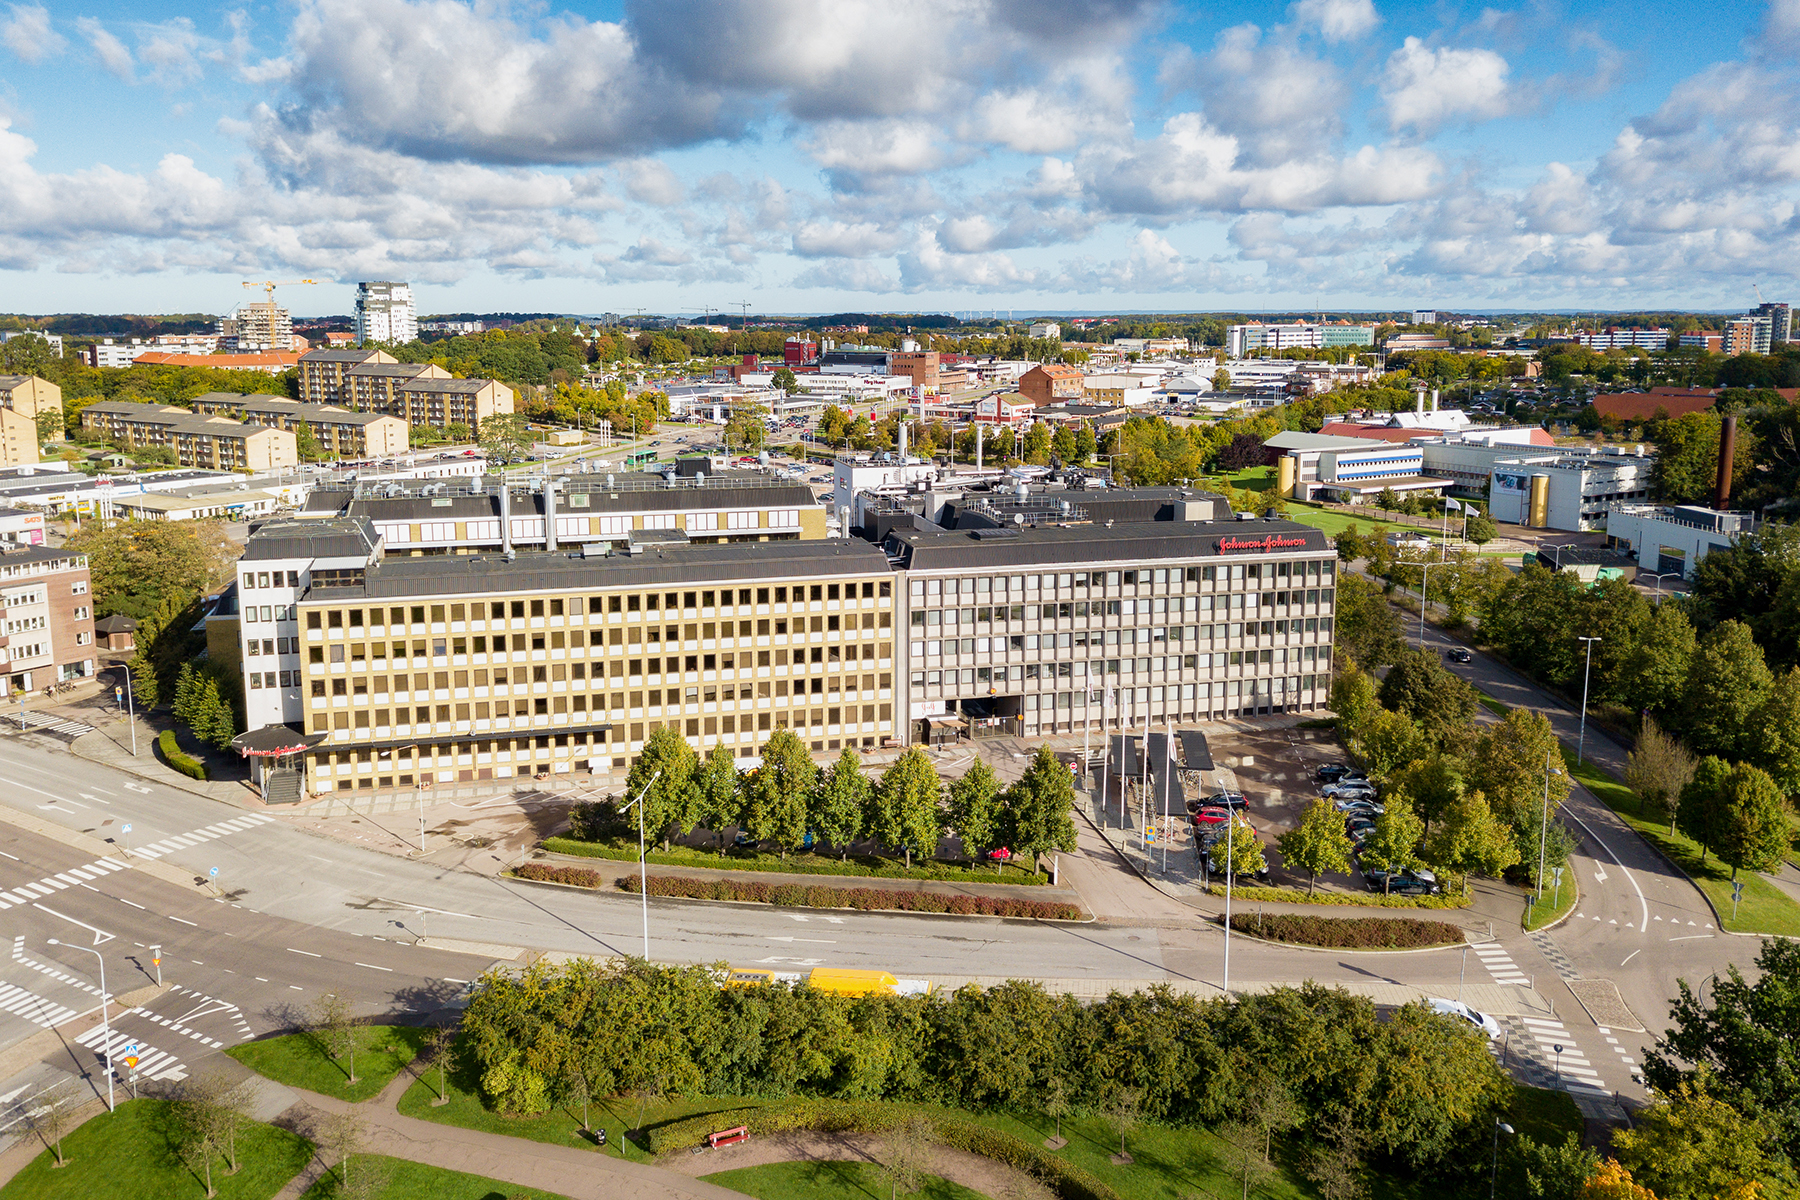 Carbon-neutral site in Sweden driving sustainable manufacturing worldwide